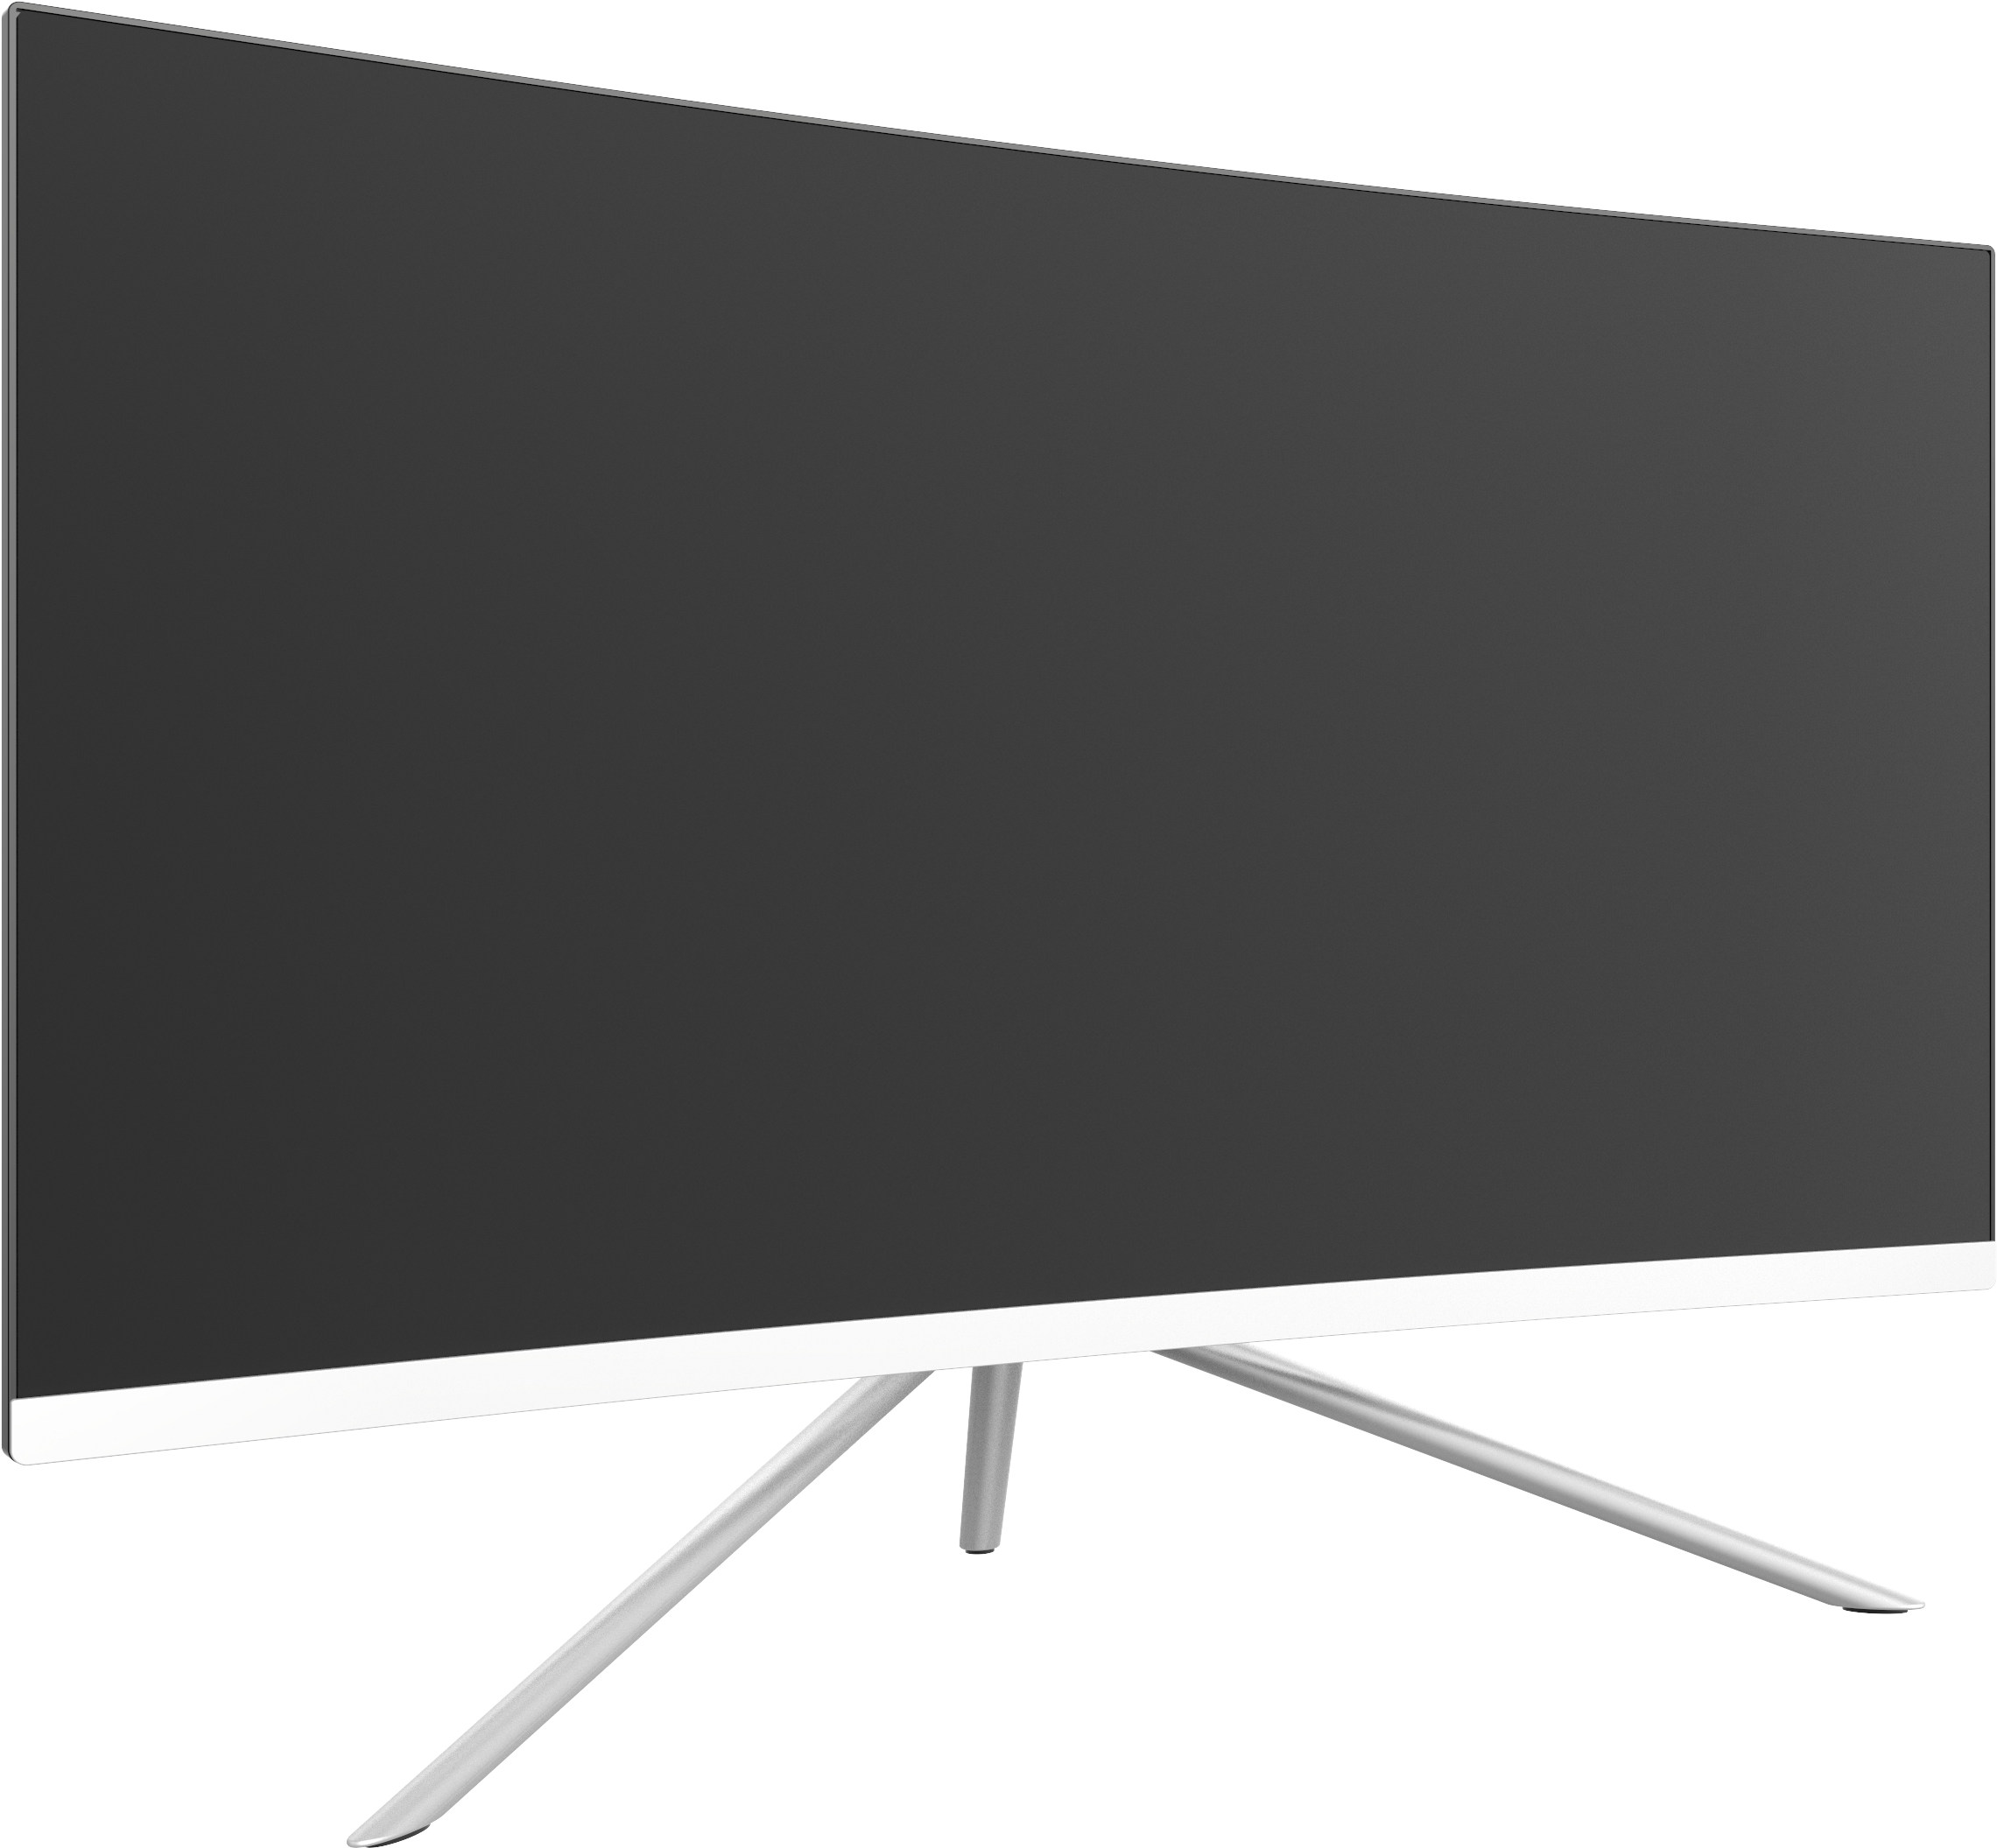 A Black Screen On A Stand